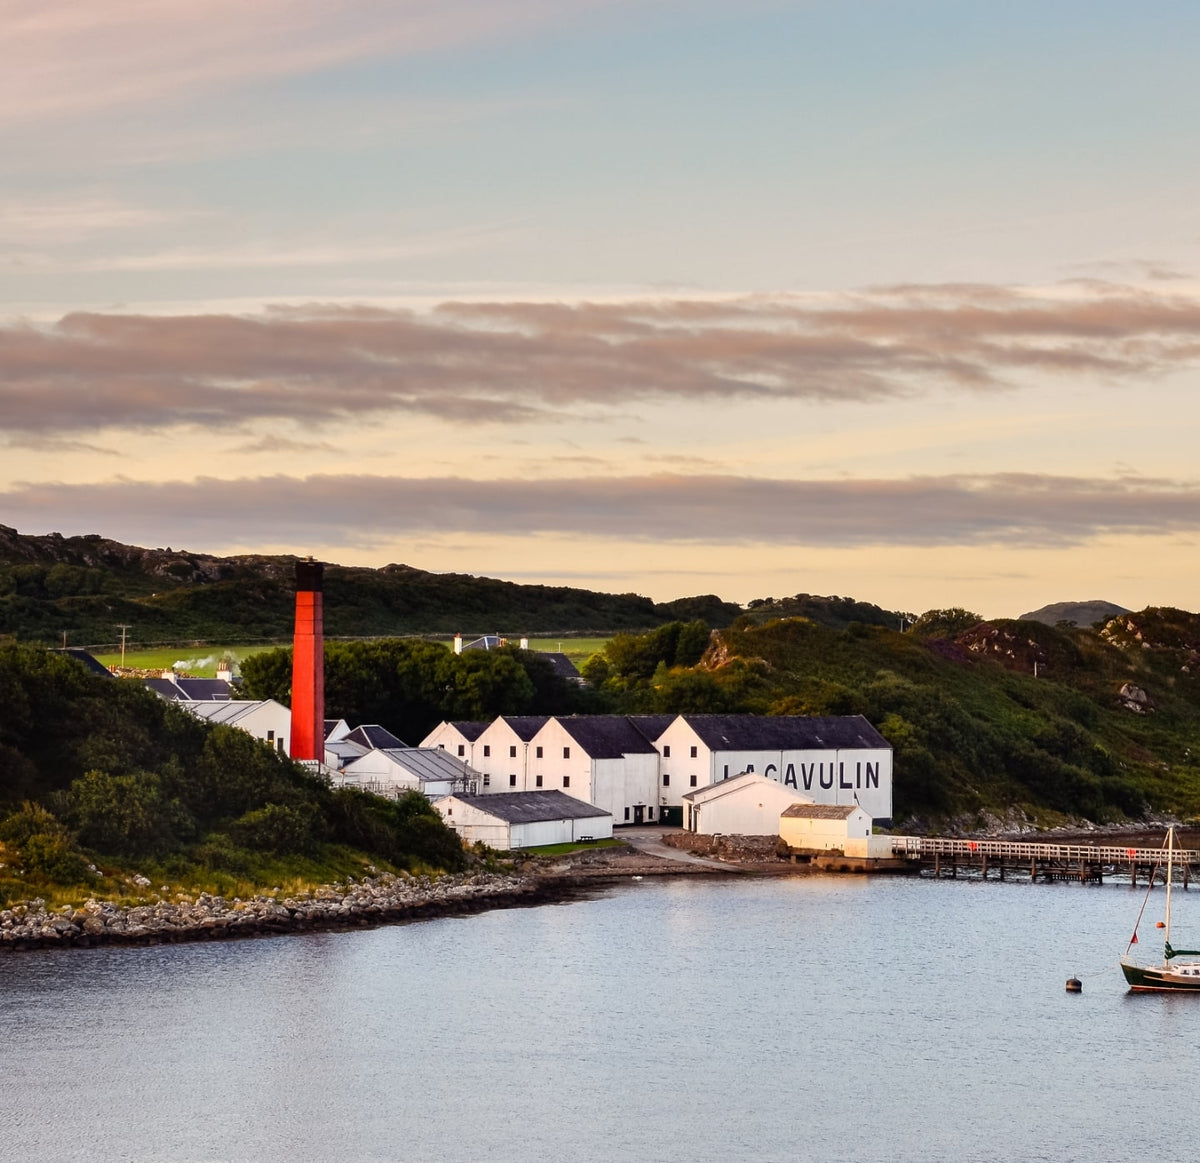 Islay coast with a white building next to a body of water and red chimney